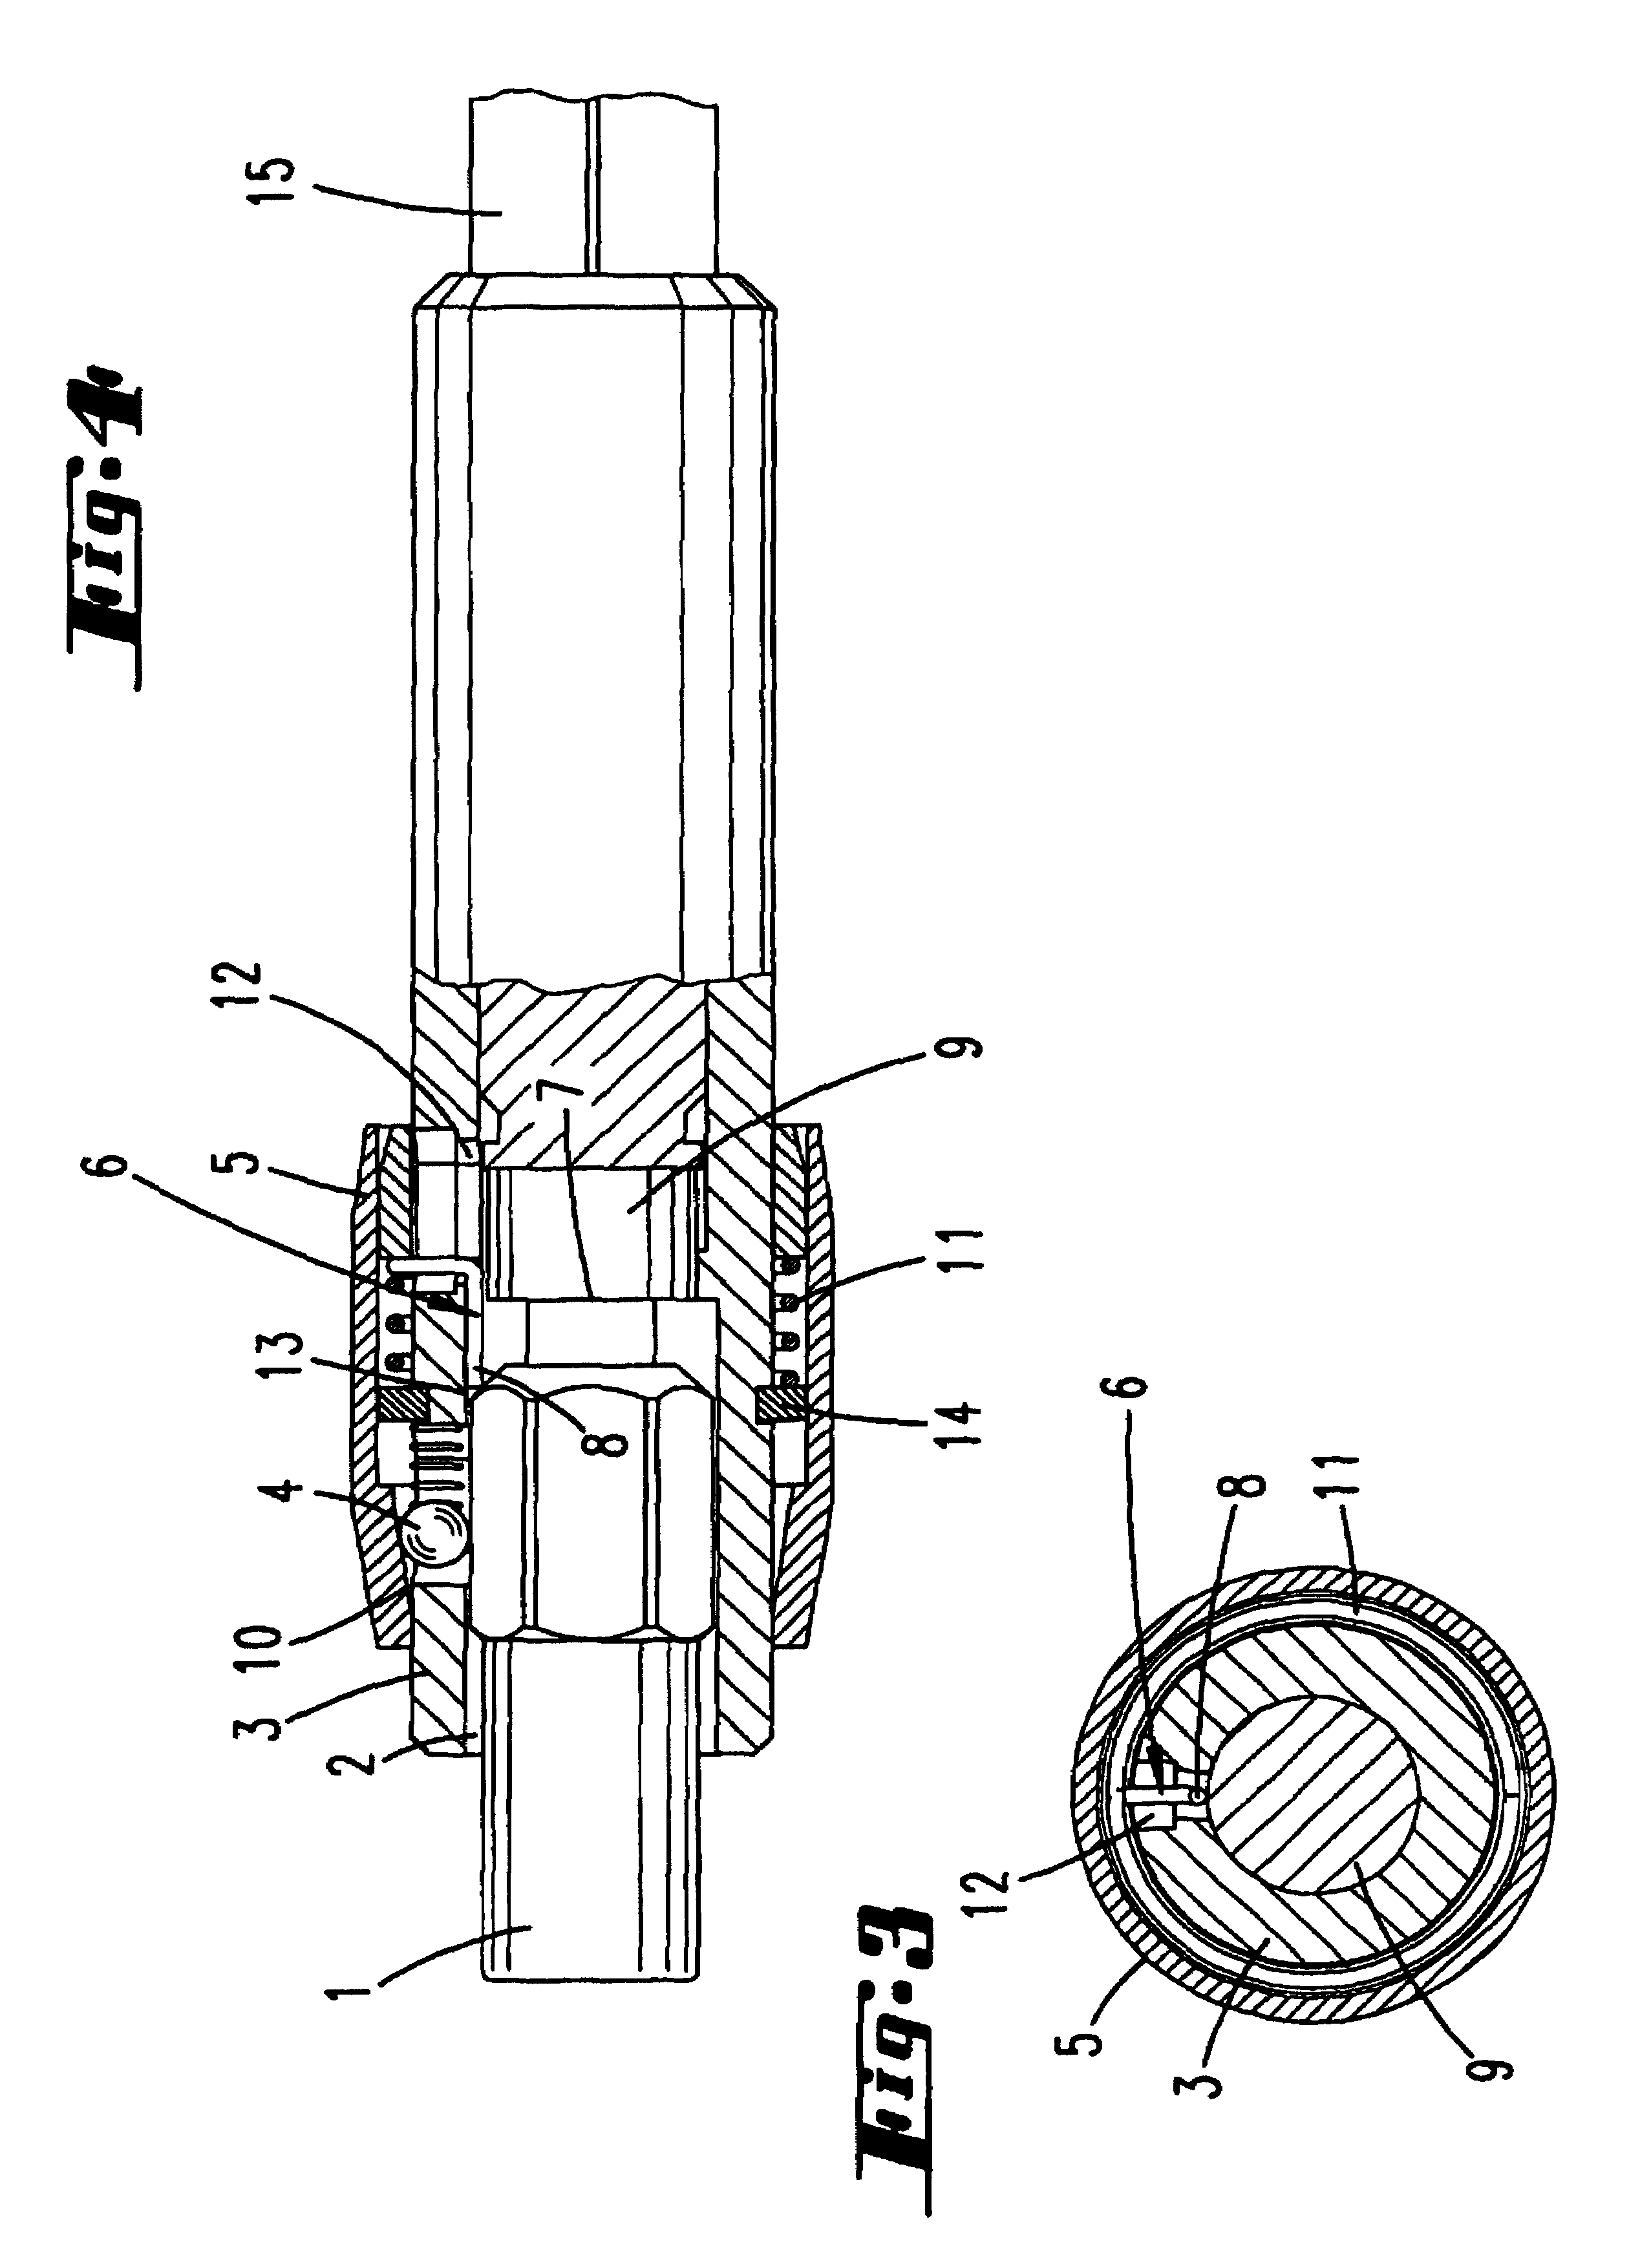 Chuck for receiving tools operated by rotating around the axis thereof